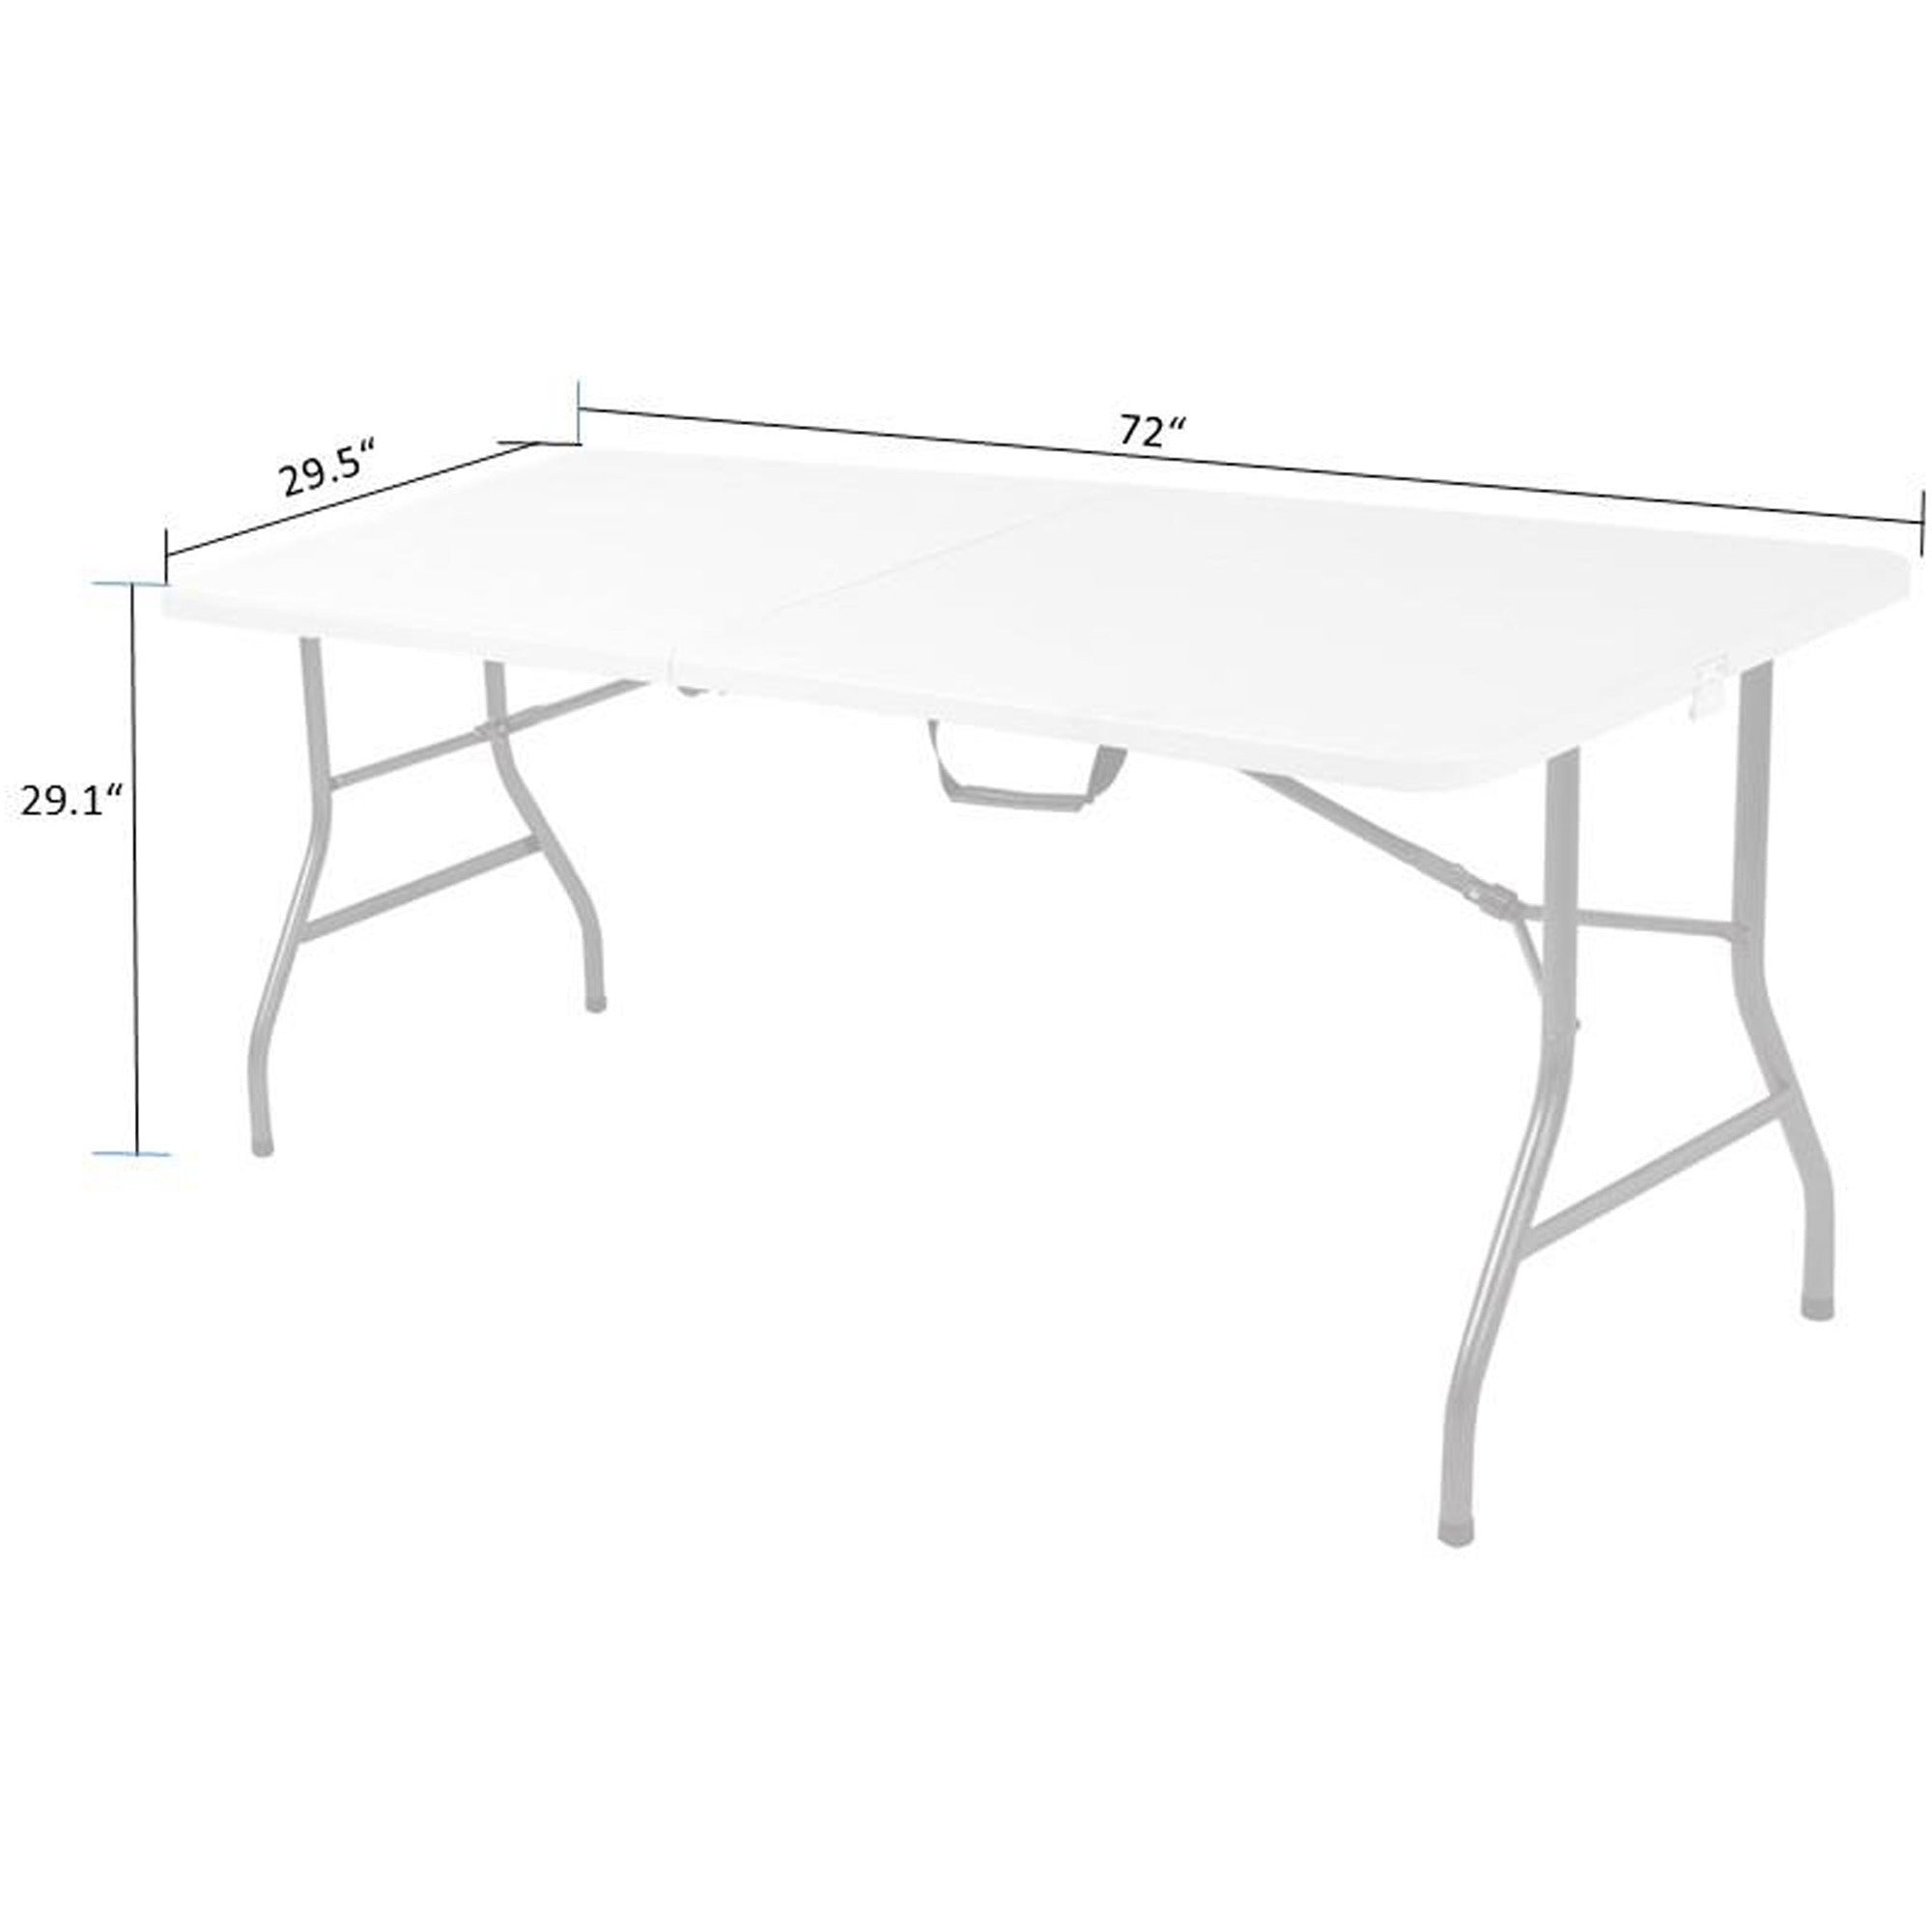 cosco-6-foot-centerfold-blow-molded-folding-table-for-table-toprectangle-top-folding-base-x-2963-table-top-width-x-72-table-top-depth-2925-height-white-1-each_csc14678wsp1 - 6